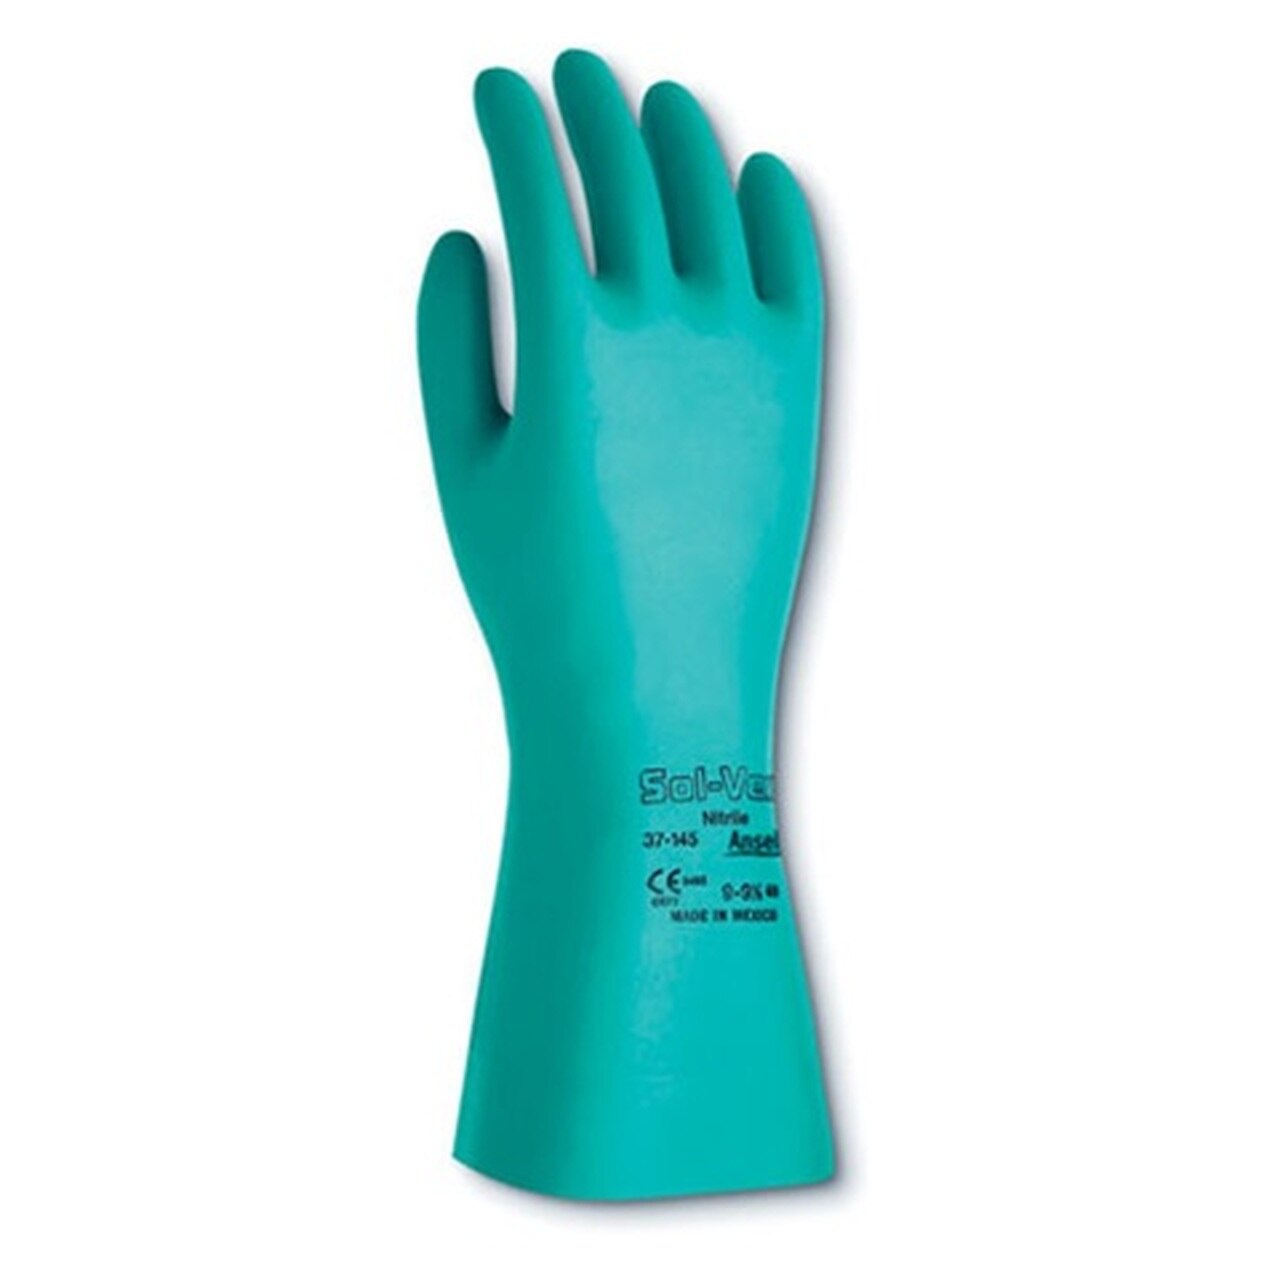 ANSELL EDMONT SOLVEX UNSUPPORTED NITRILE CHEMICAL RESISTANT GLOVES 11MIL,13", STRAIGHT CUFF S8